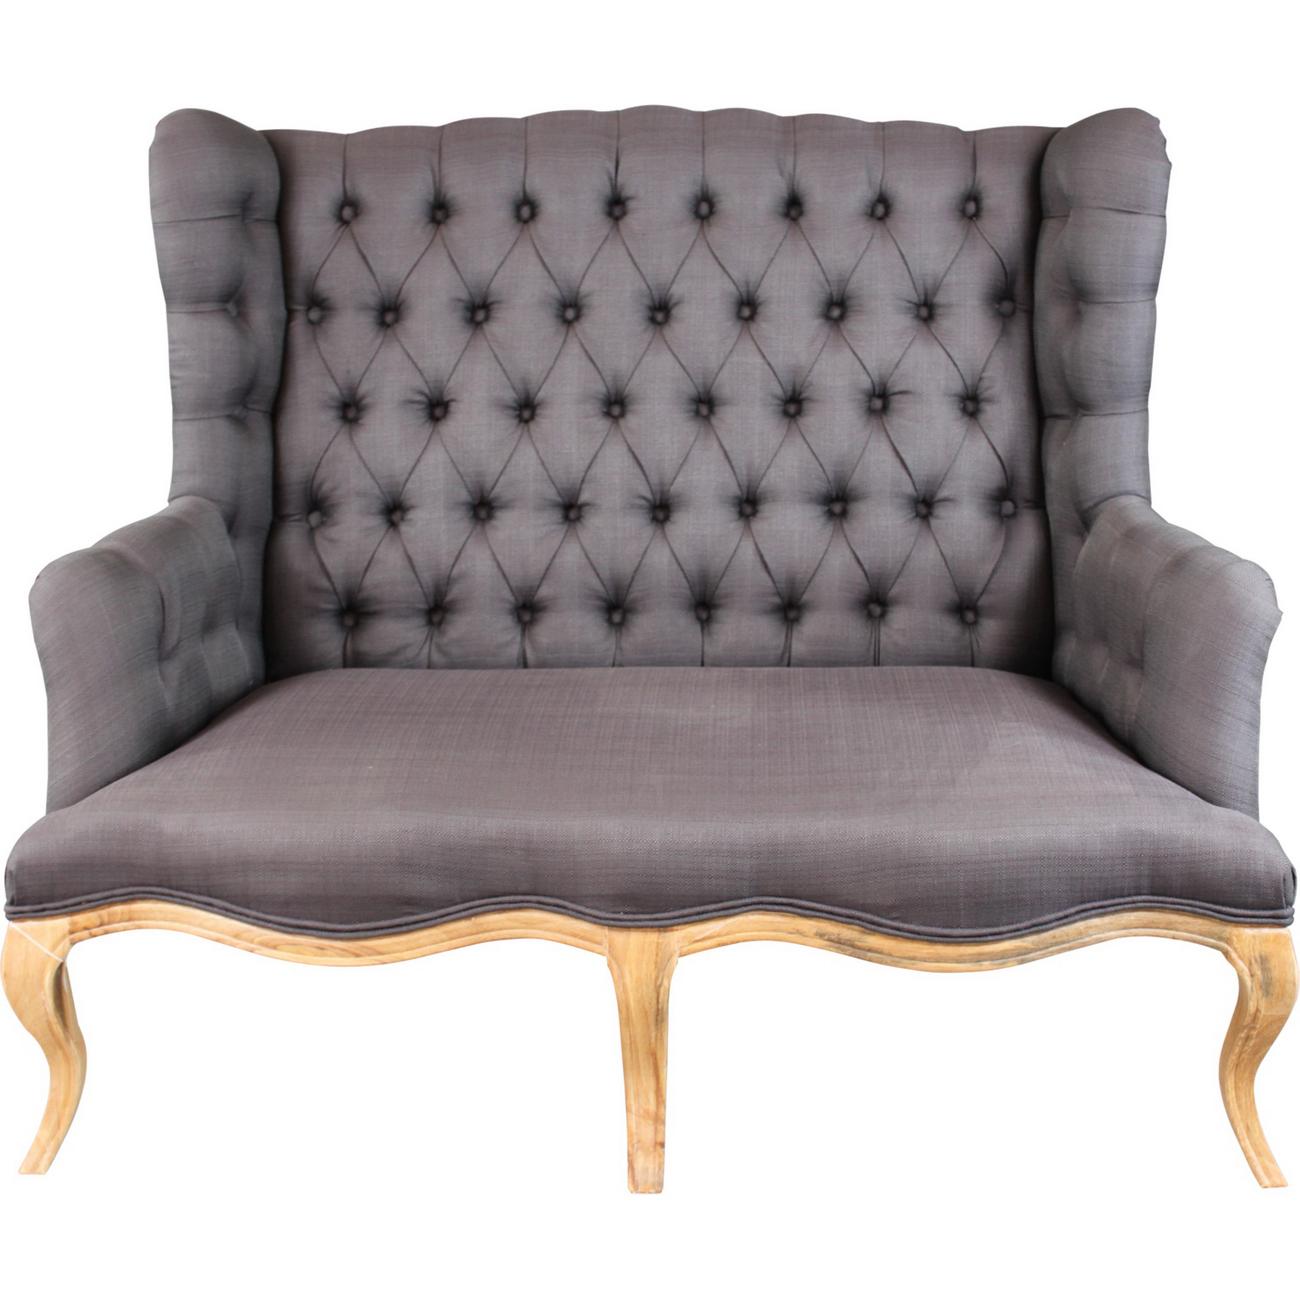 Traditional Loveseat 31362 31362-Loveseat in Gray Fabric